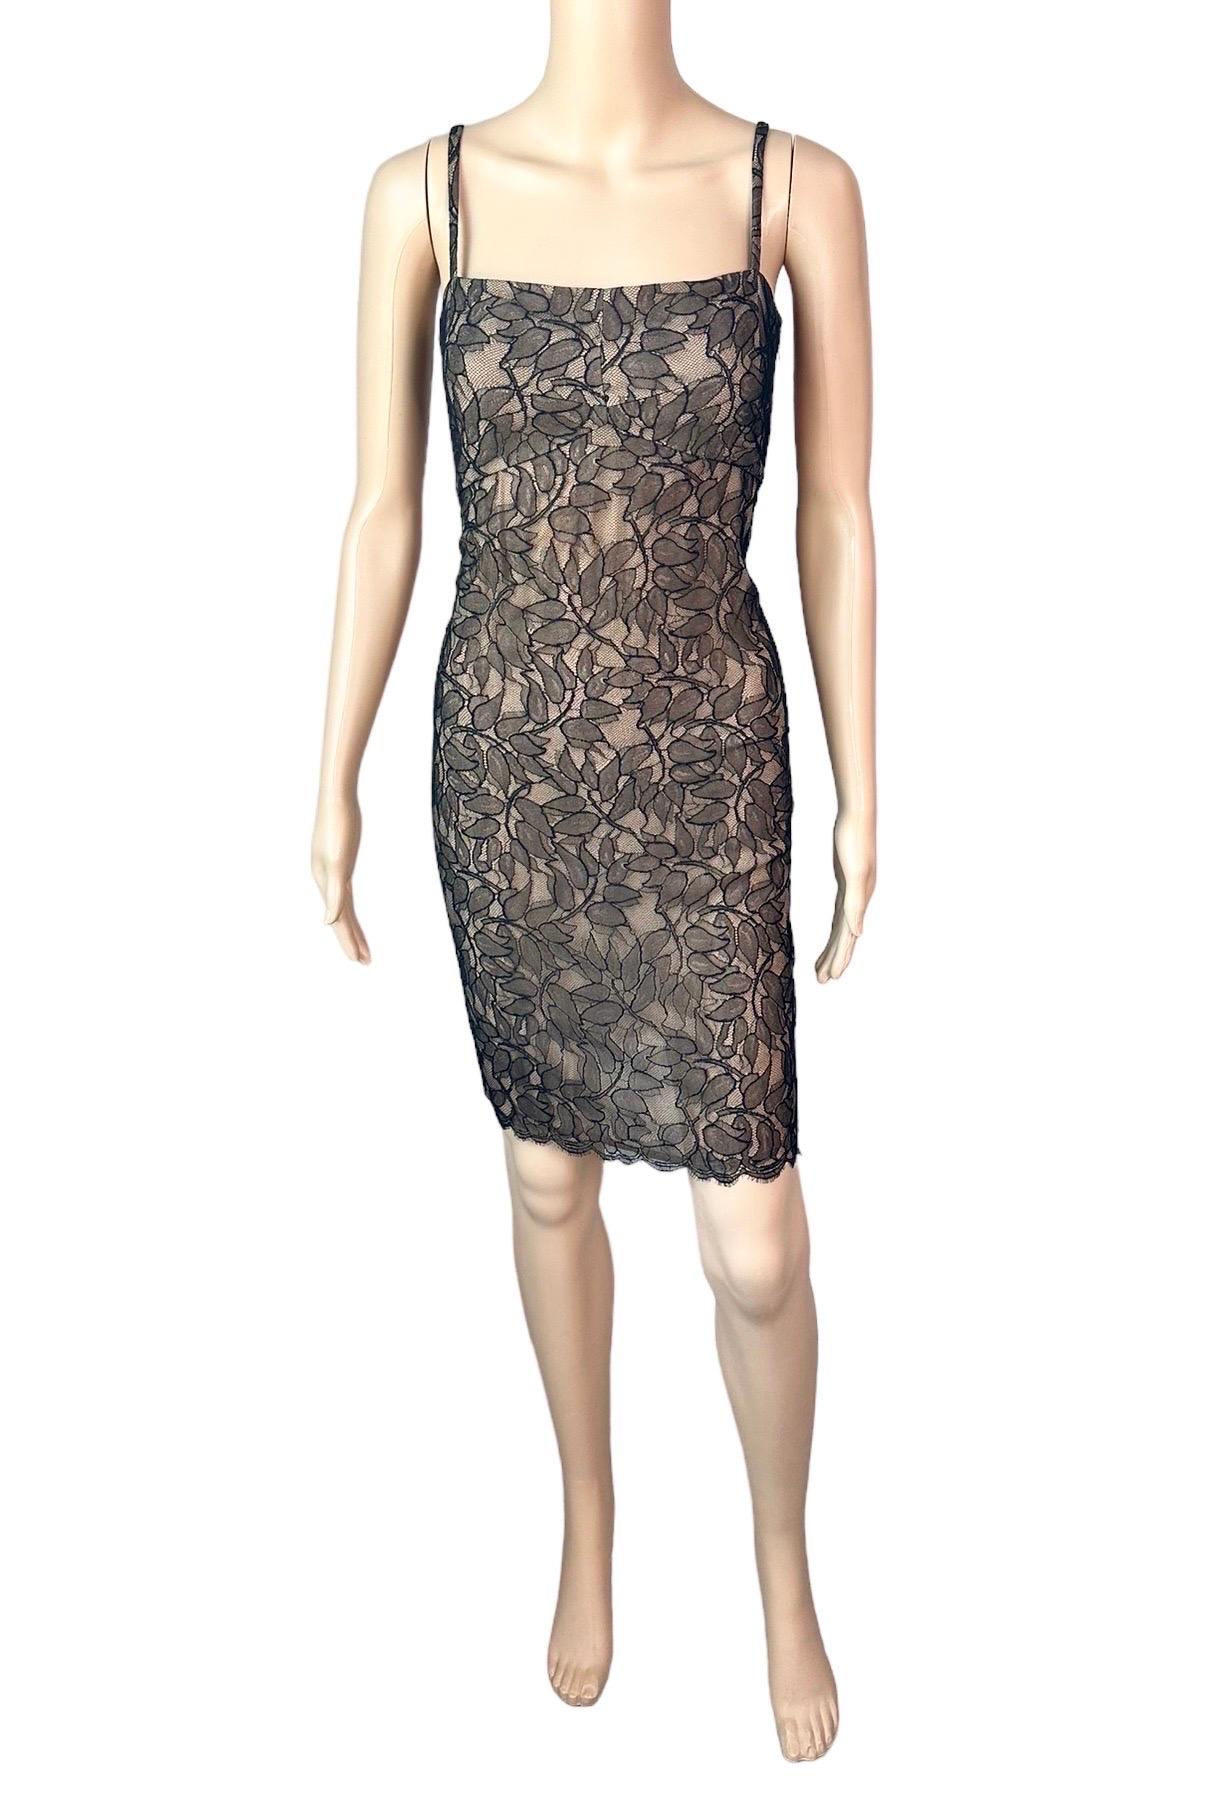 Gianni Versace Istante c. 1998 Sheer Lace Mini Dress For Sale 1